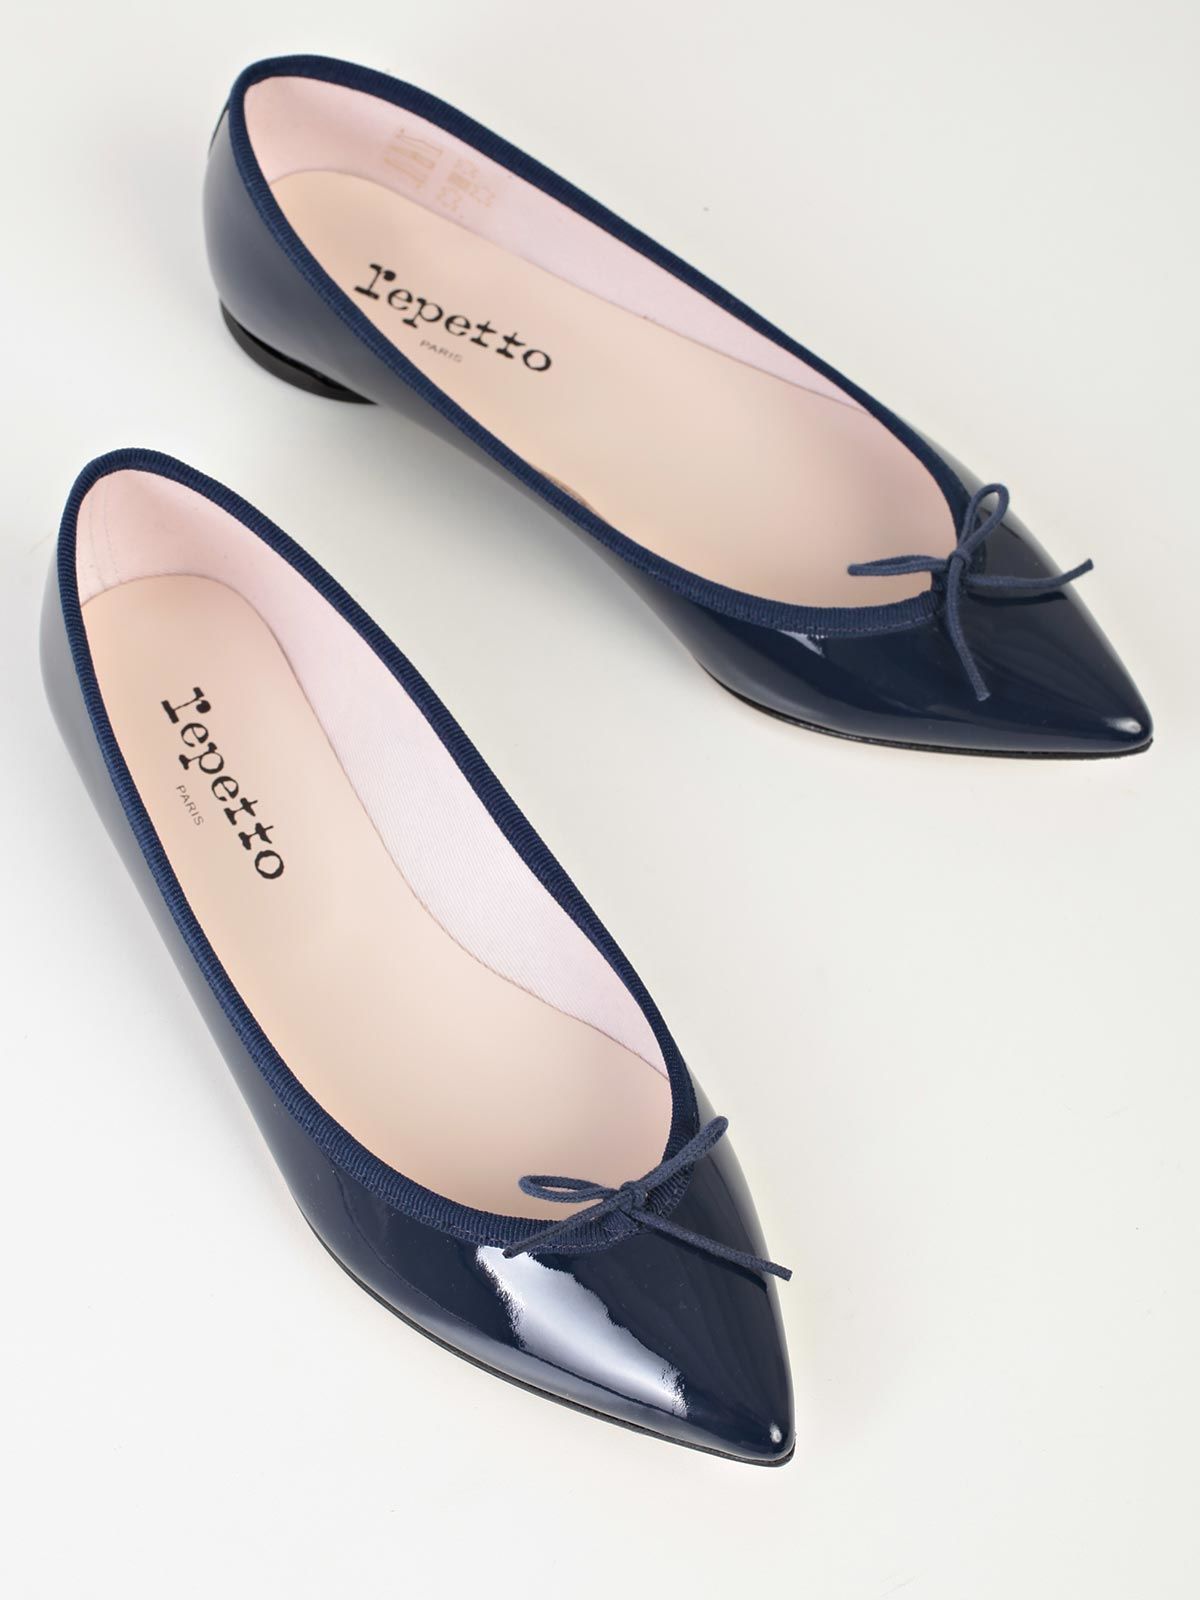 Repetto - Repetto Flat Shoes - Blue, Women's Flat Shoes | Italist